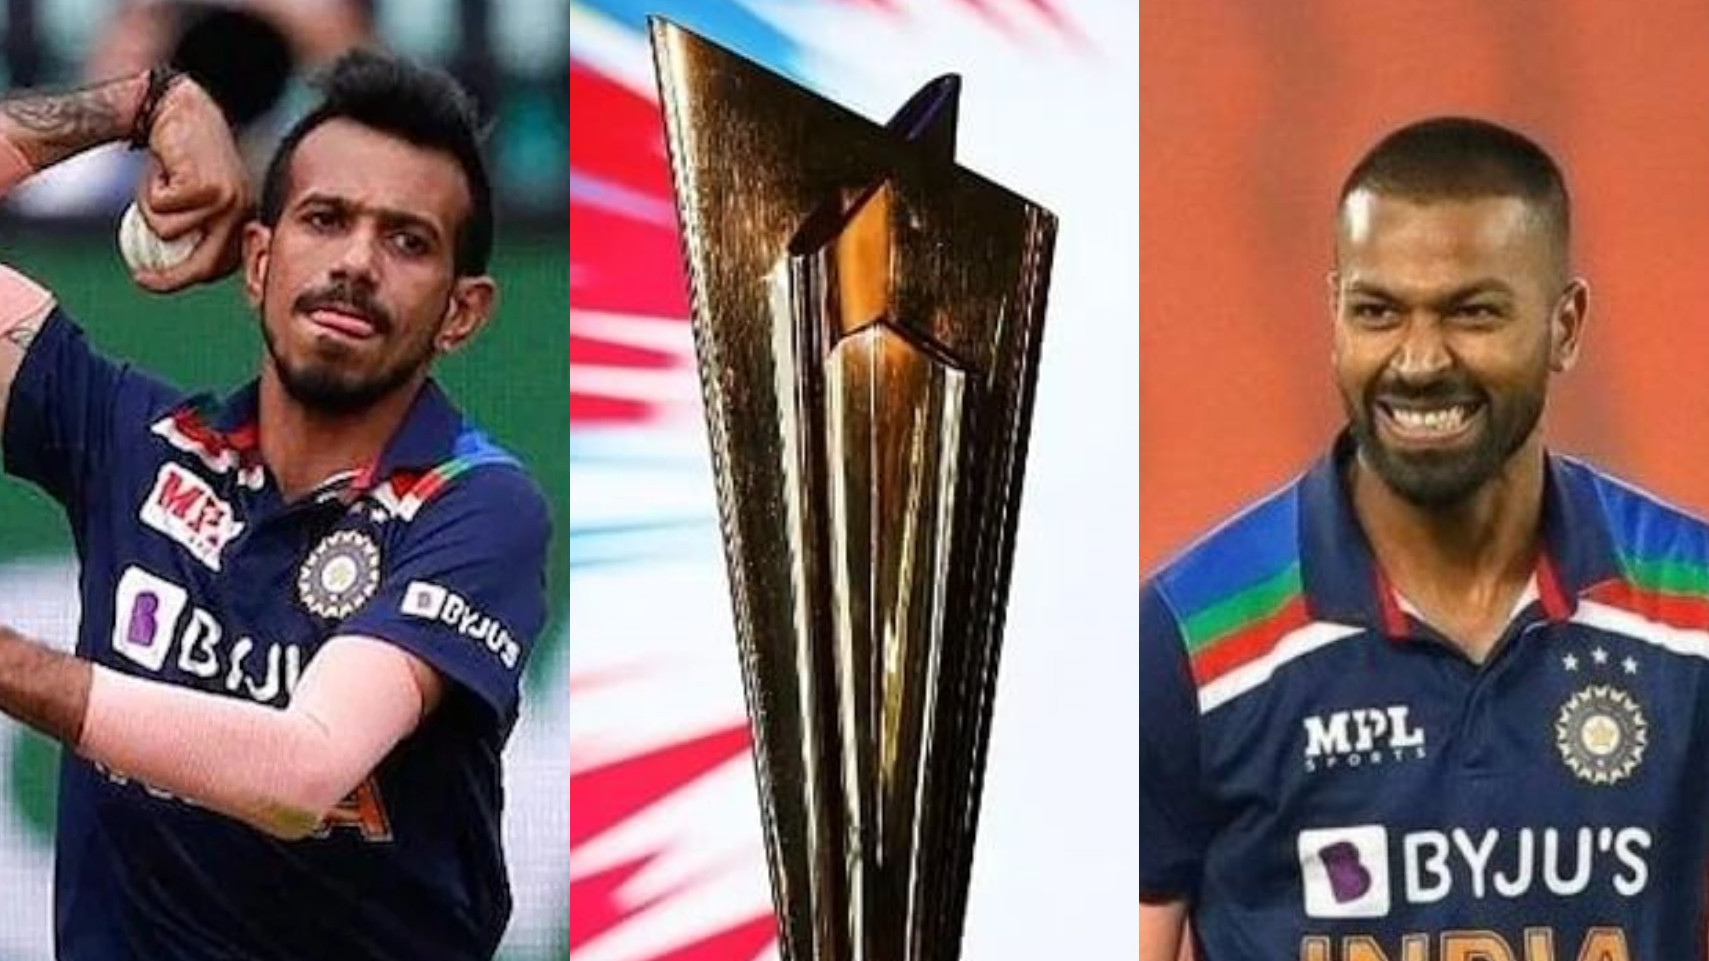 Yuzvendra Chahal back in contention for T20 World Cup 2021; Hardik Pandya's spot uncertain